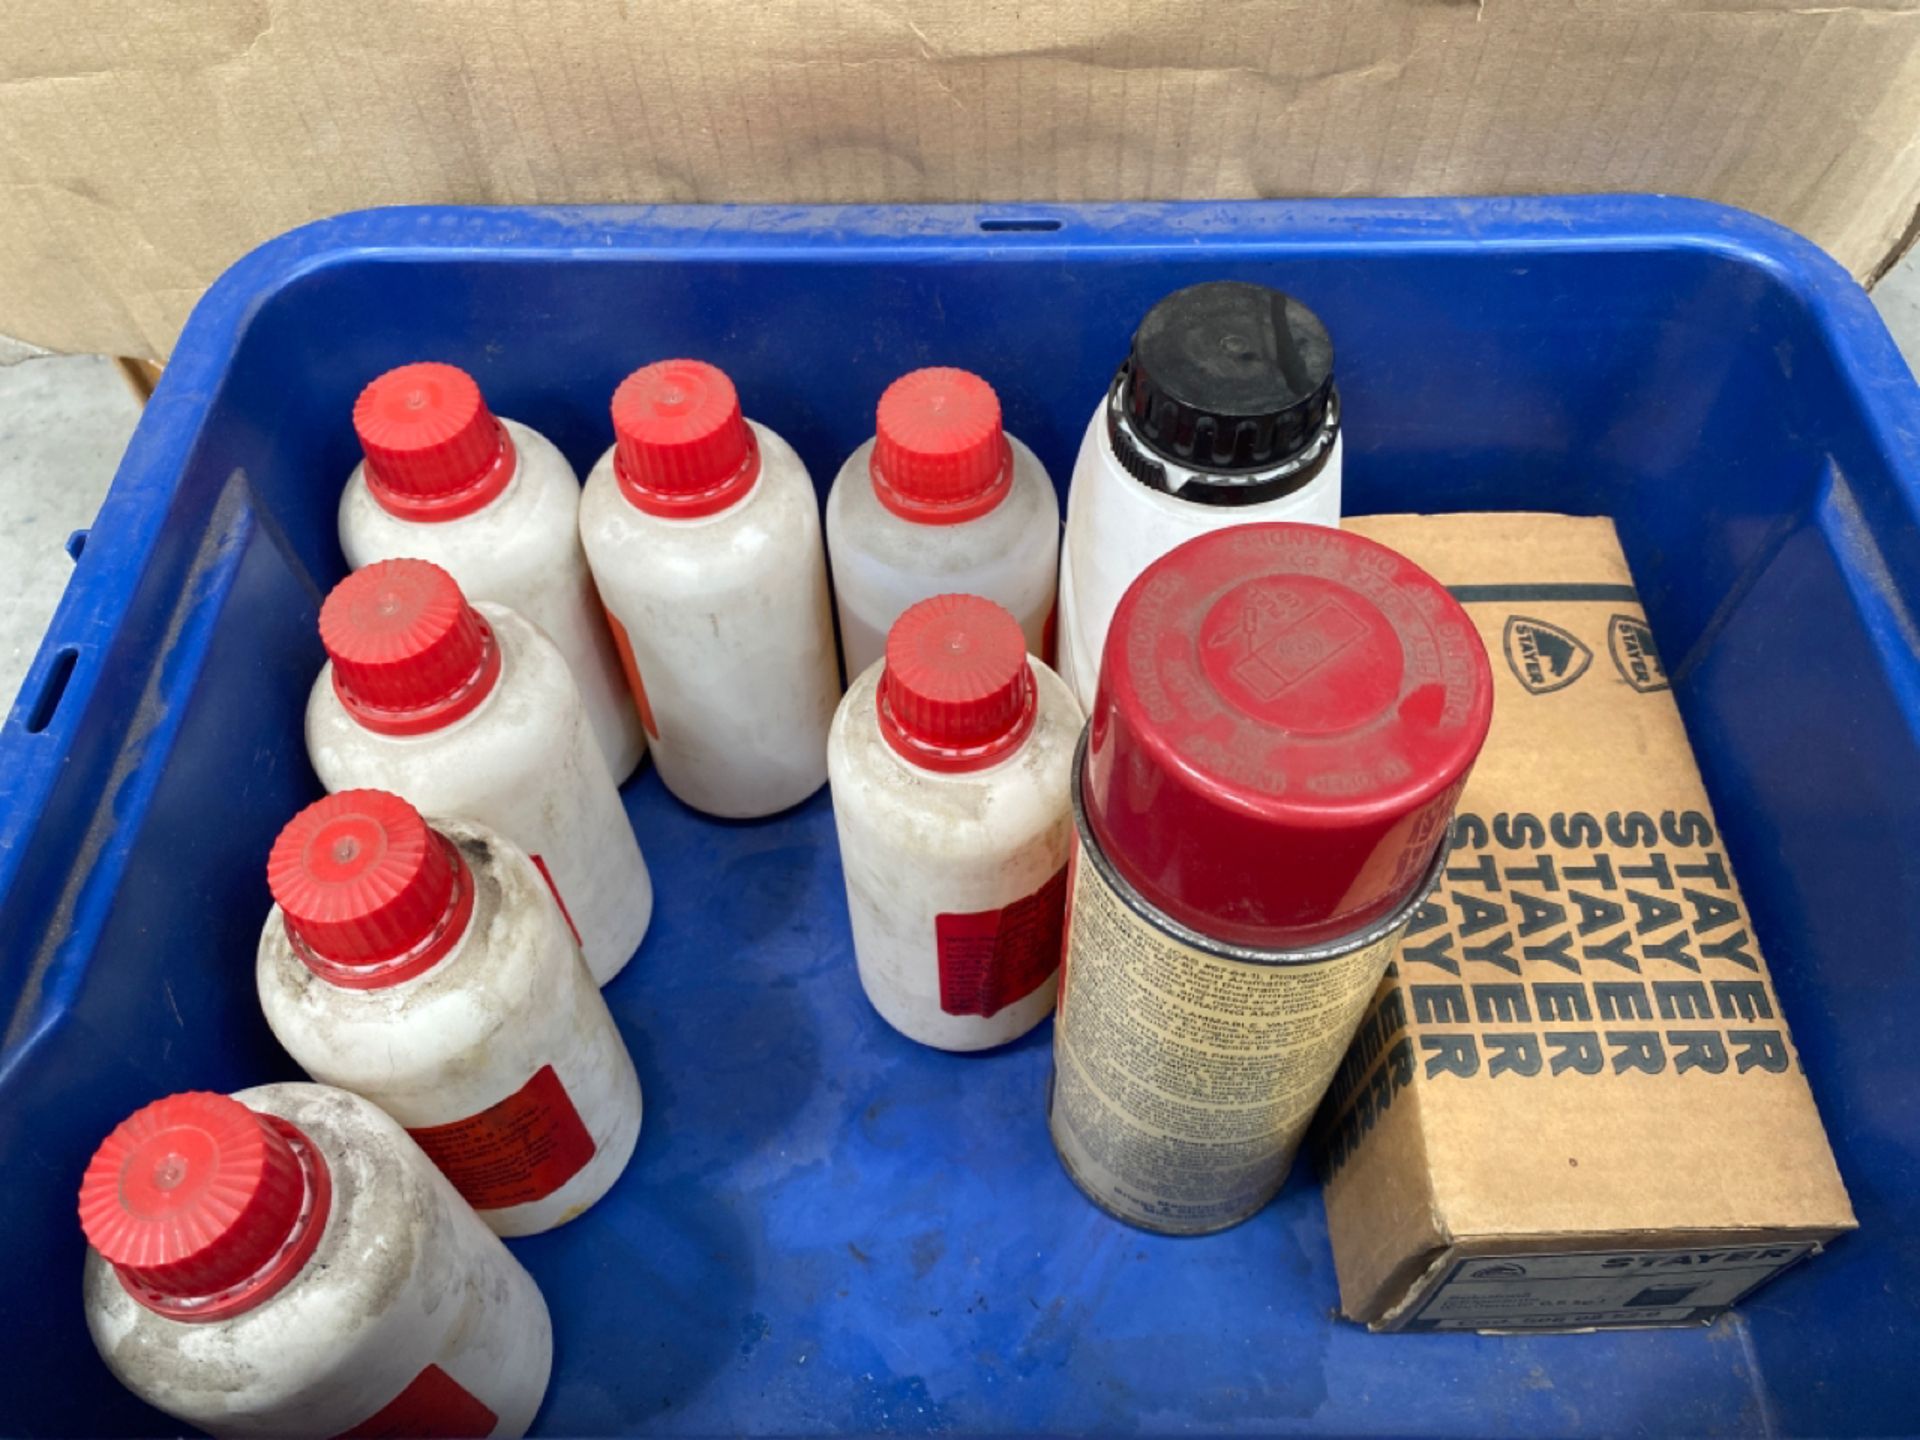 Quantity of Clarke Compressor Oil SAE40 and Surface Cleaner - No Reserve - Image 4 of 4